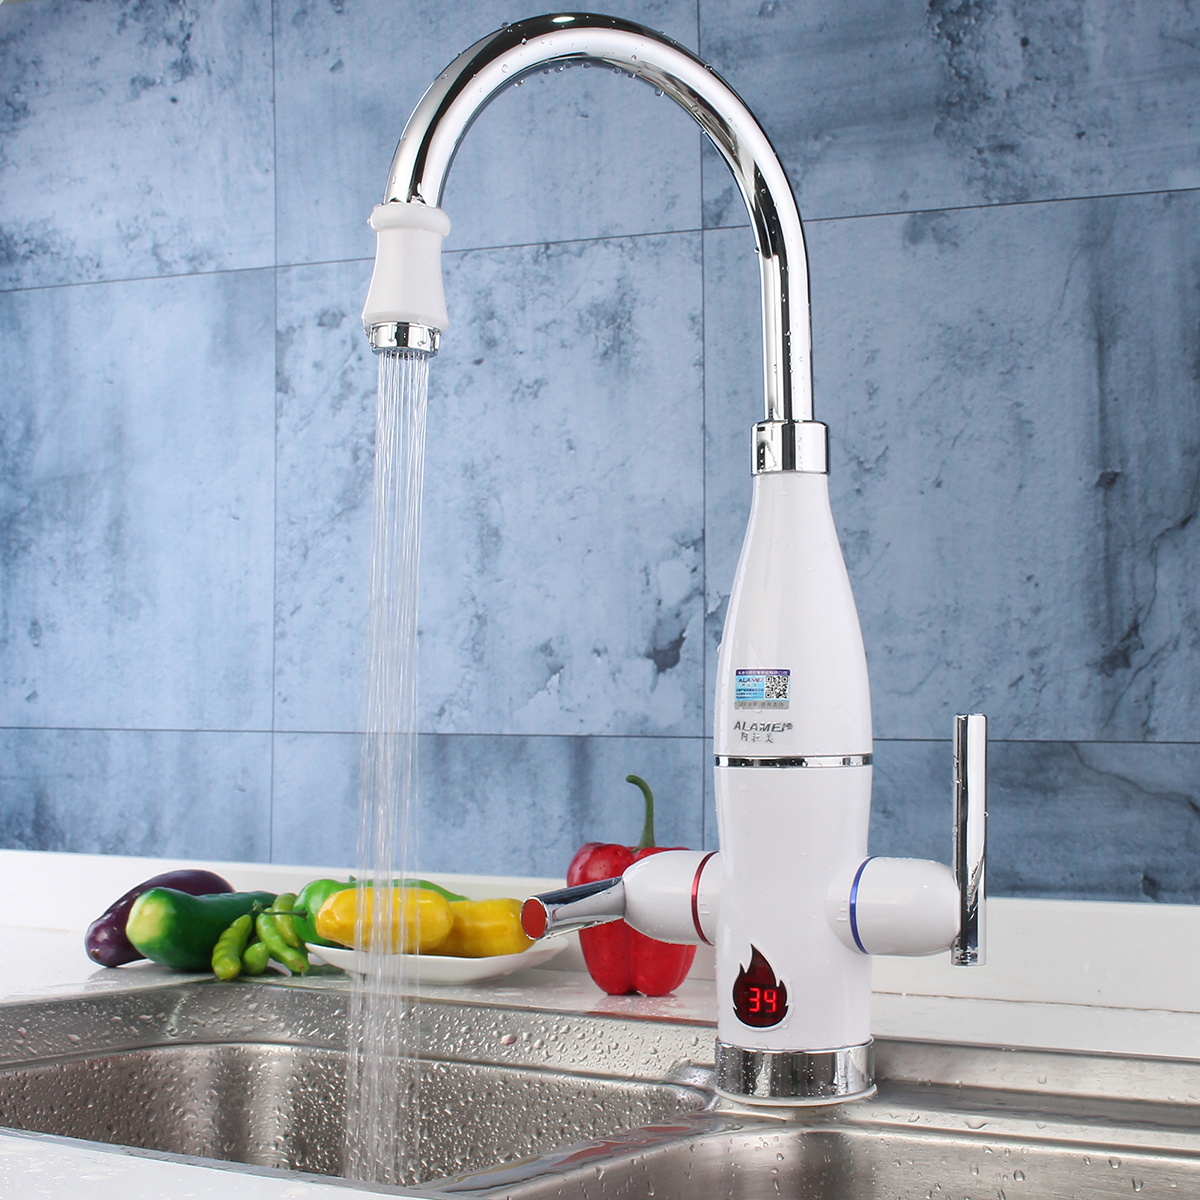 220V-Electric-Faucet-Tap-Instant-Water-Heater-Tankless-LED-Digital-1123127